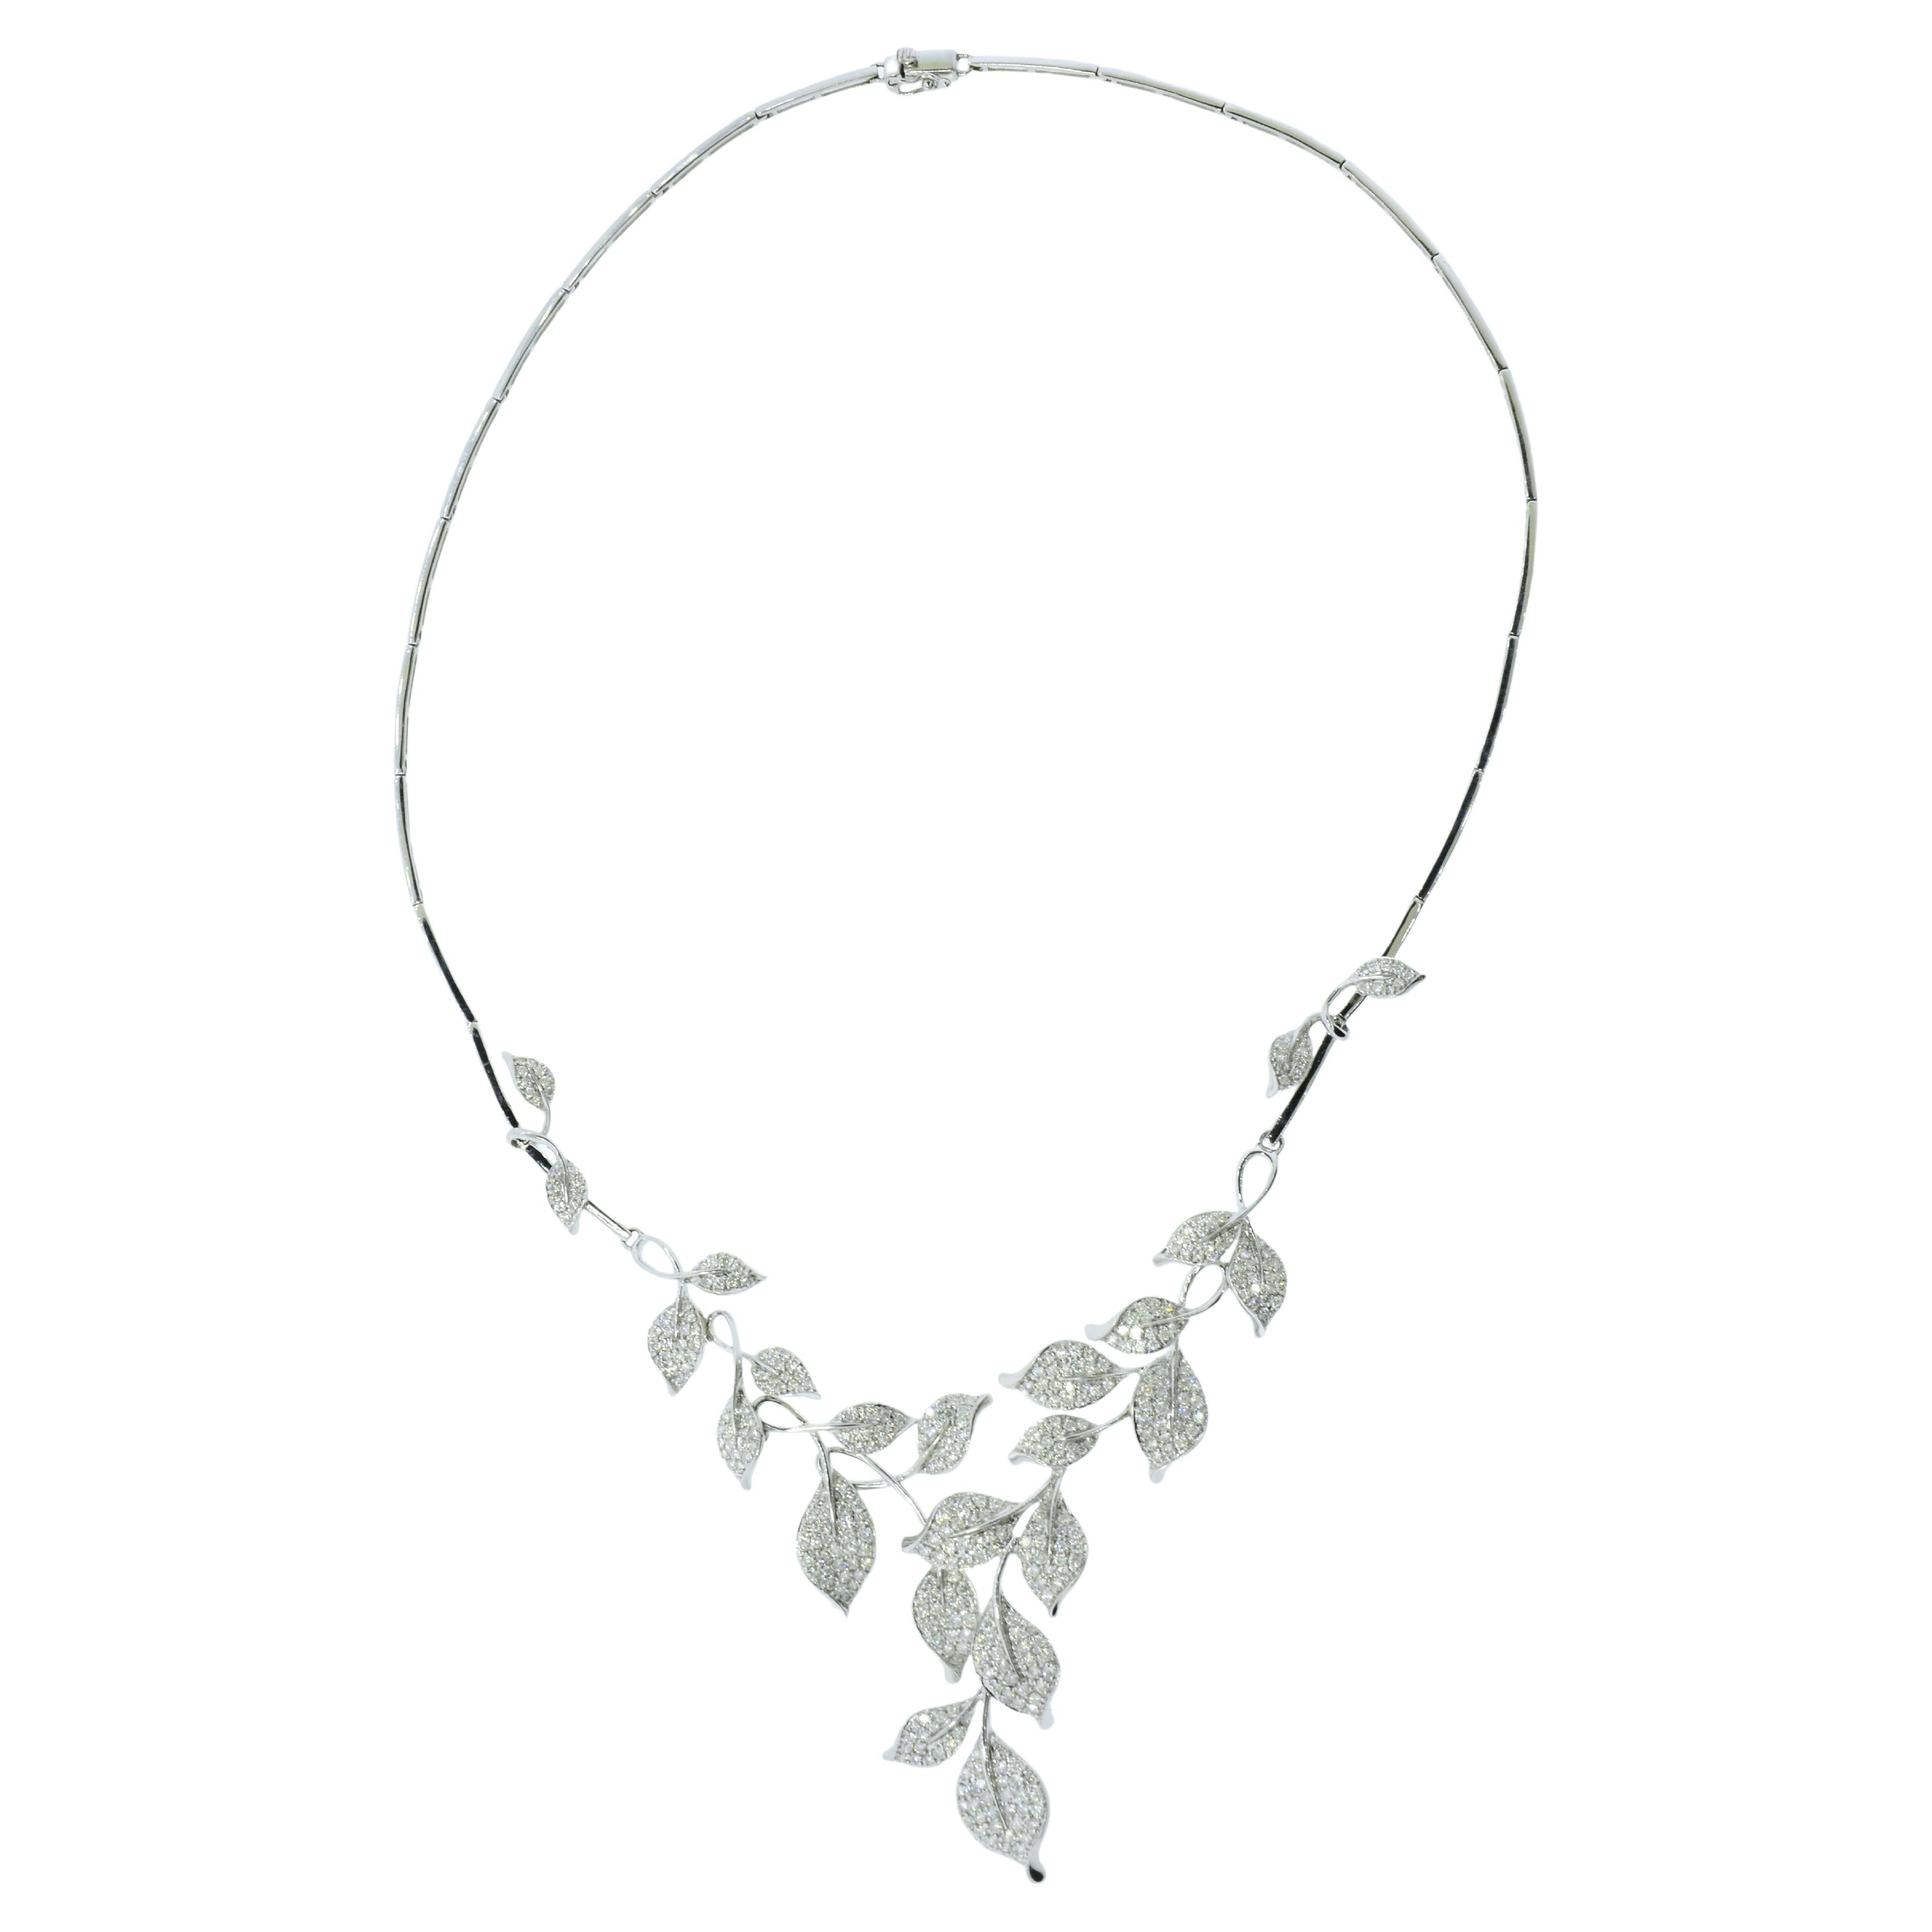 Fine diamond contemporary well made necklace composed of stylized foliage in 18K white gold.  With a length of 16.75 inches long, this diamond pave necklace in 18K white gold has 23 leafs at its center which contain 405 diamonds amounting to an